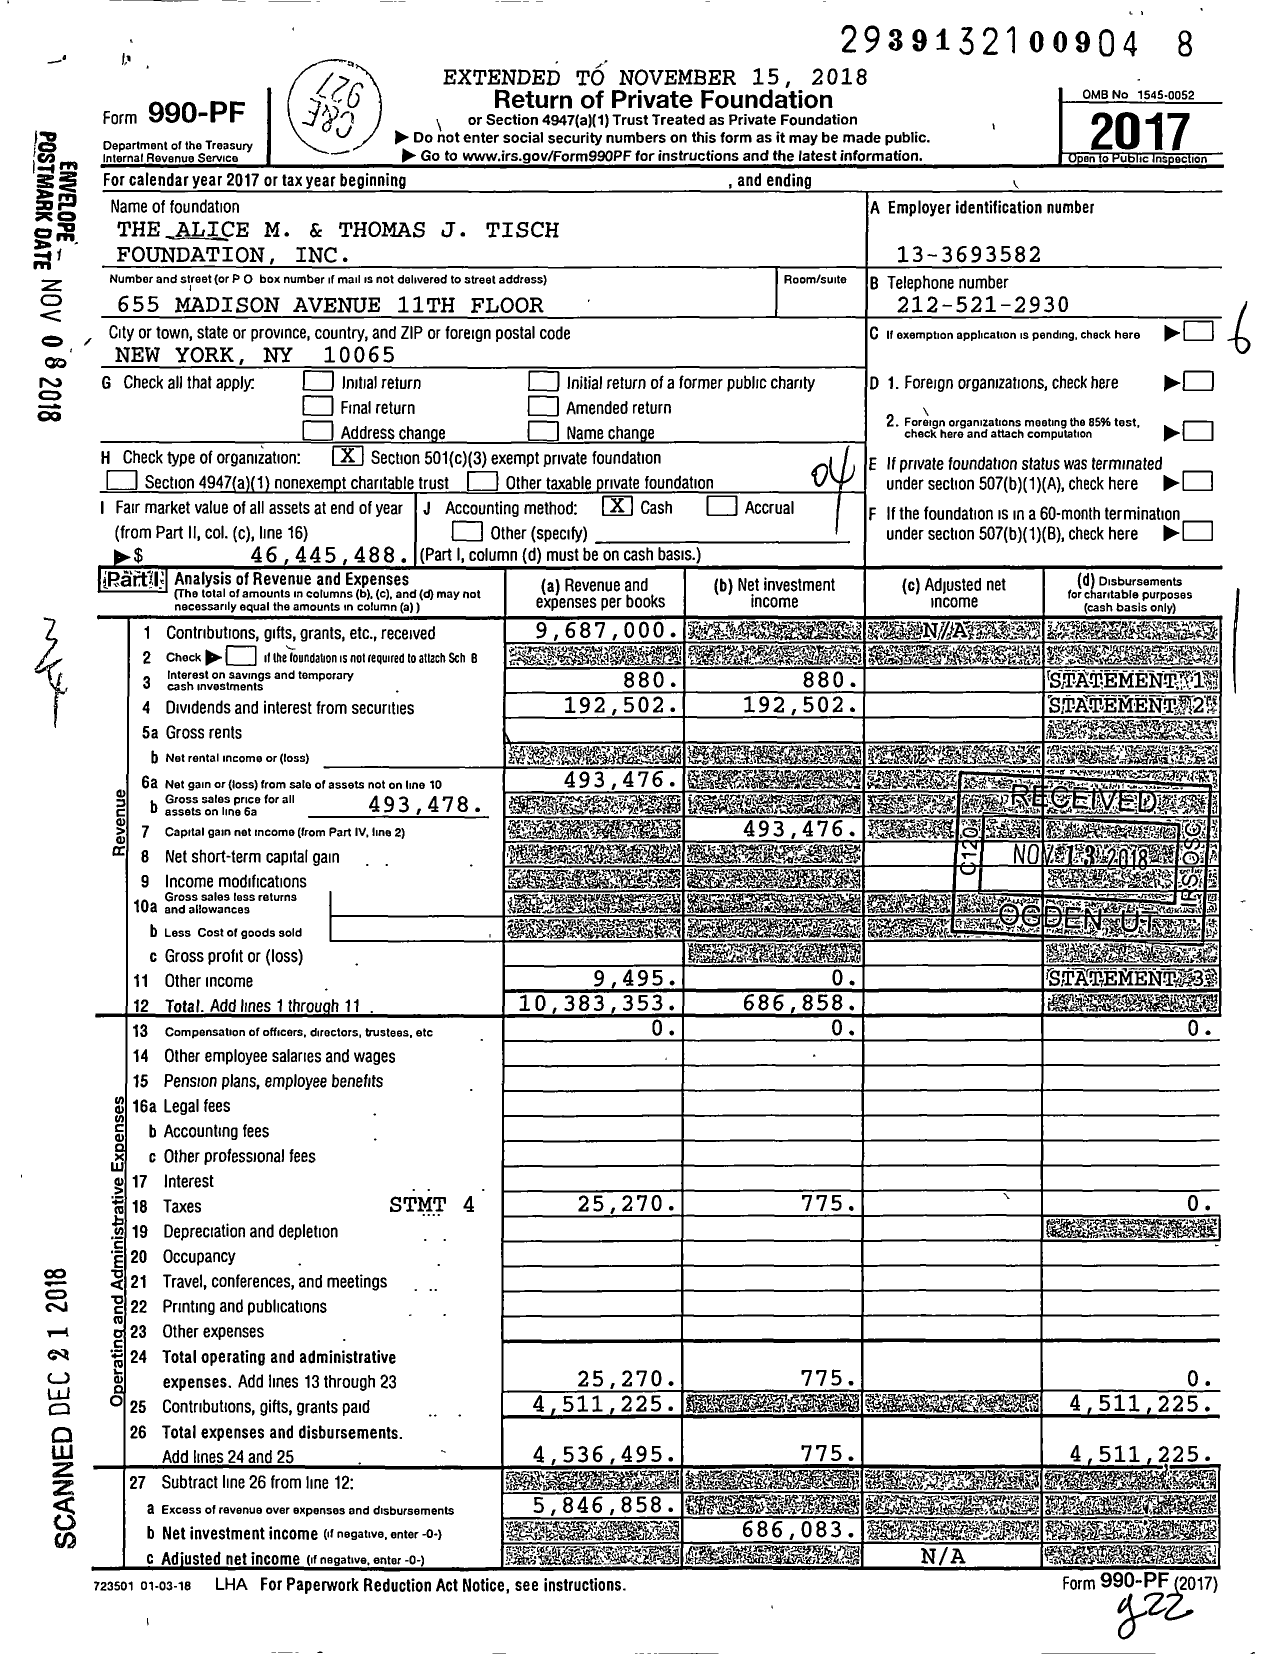 Image of first page of 2017 Form 990PF for Alice M. and Thomas J. Tisch Foundation